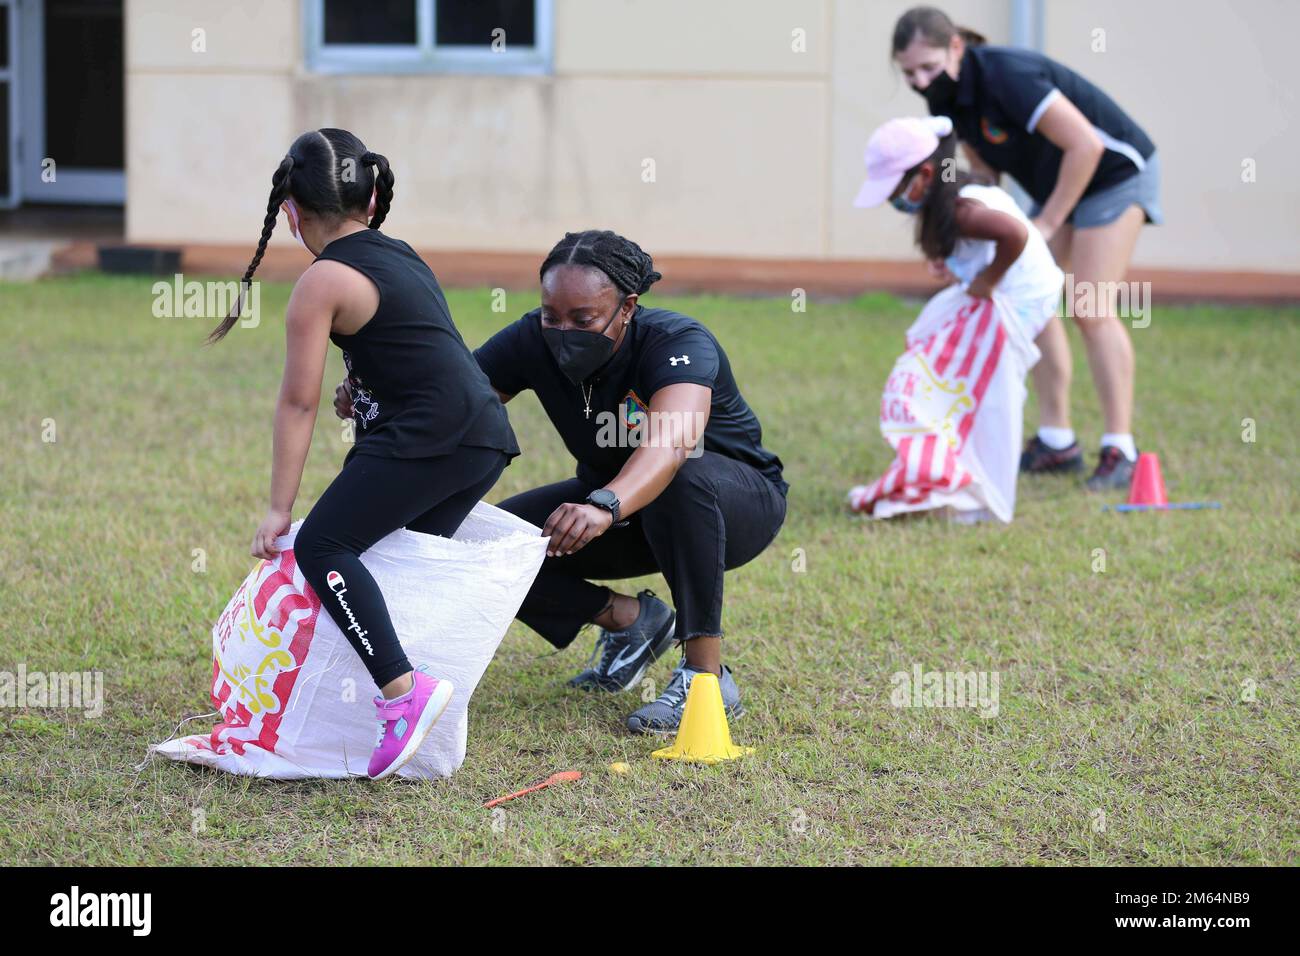 U.S. Marine Corps Gunnery Sgt. Shantavia Wilson, the protocol chief for Marine Corps Base Camp Blaz, assists with a sack race at Liguan Elementary School during a field day event in Dededo, Guam, April 1, 2022. Marines from the base assisted the school in facilitating various relay races as an opportunity to engage with the local community and continue to foster the relationship between the Marine Corps and Liguan Elementary School. Stock Photo